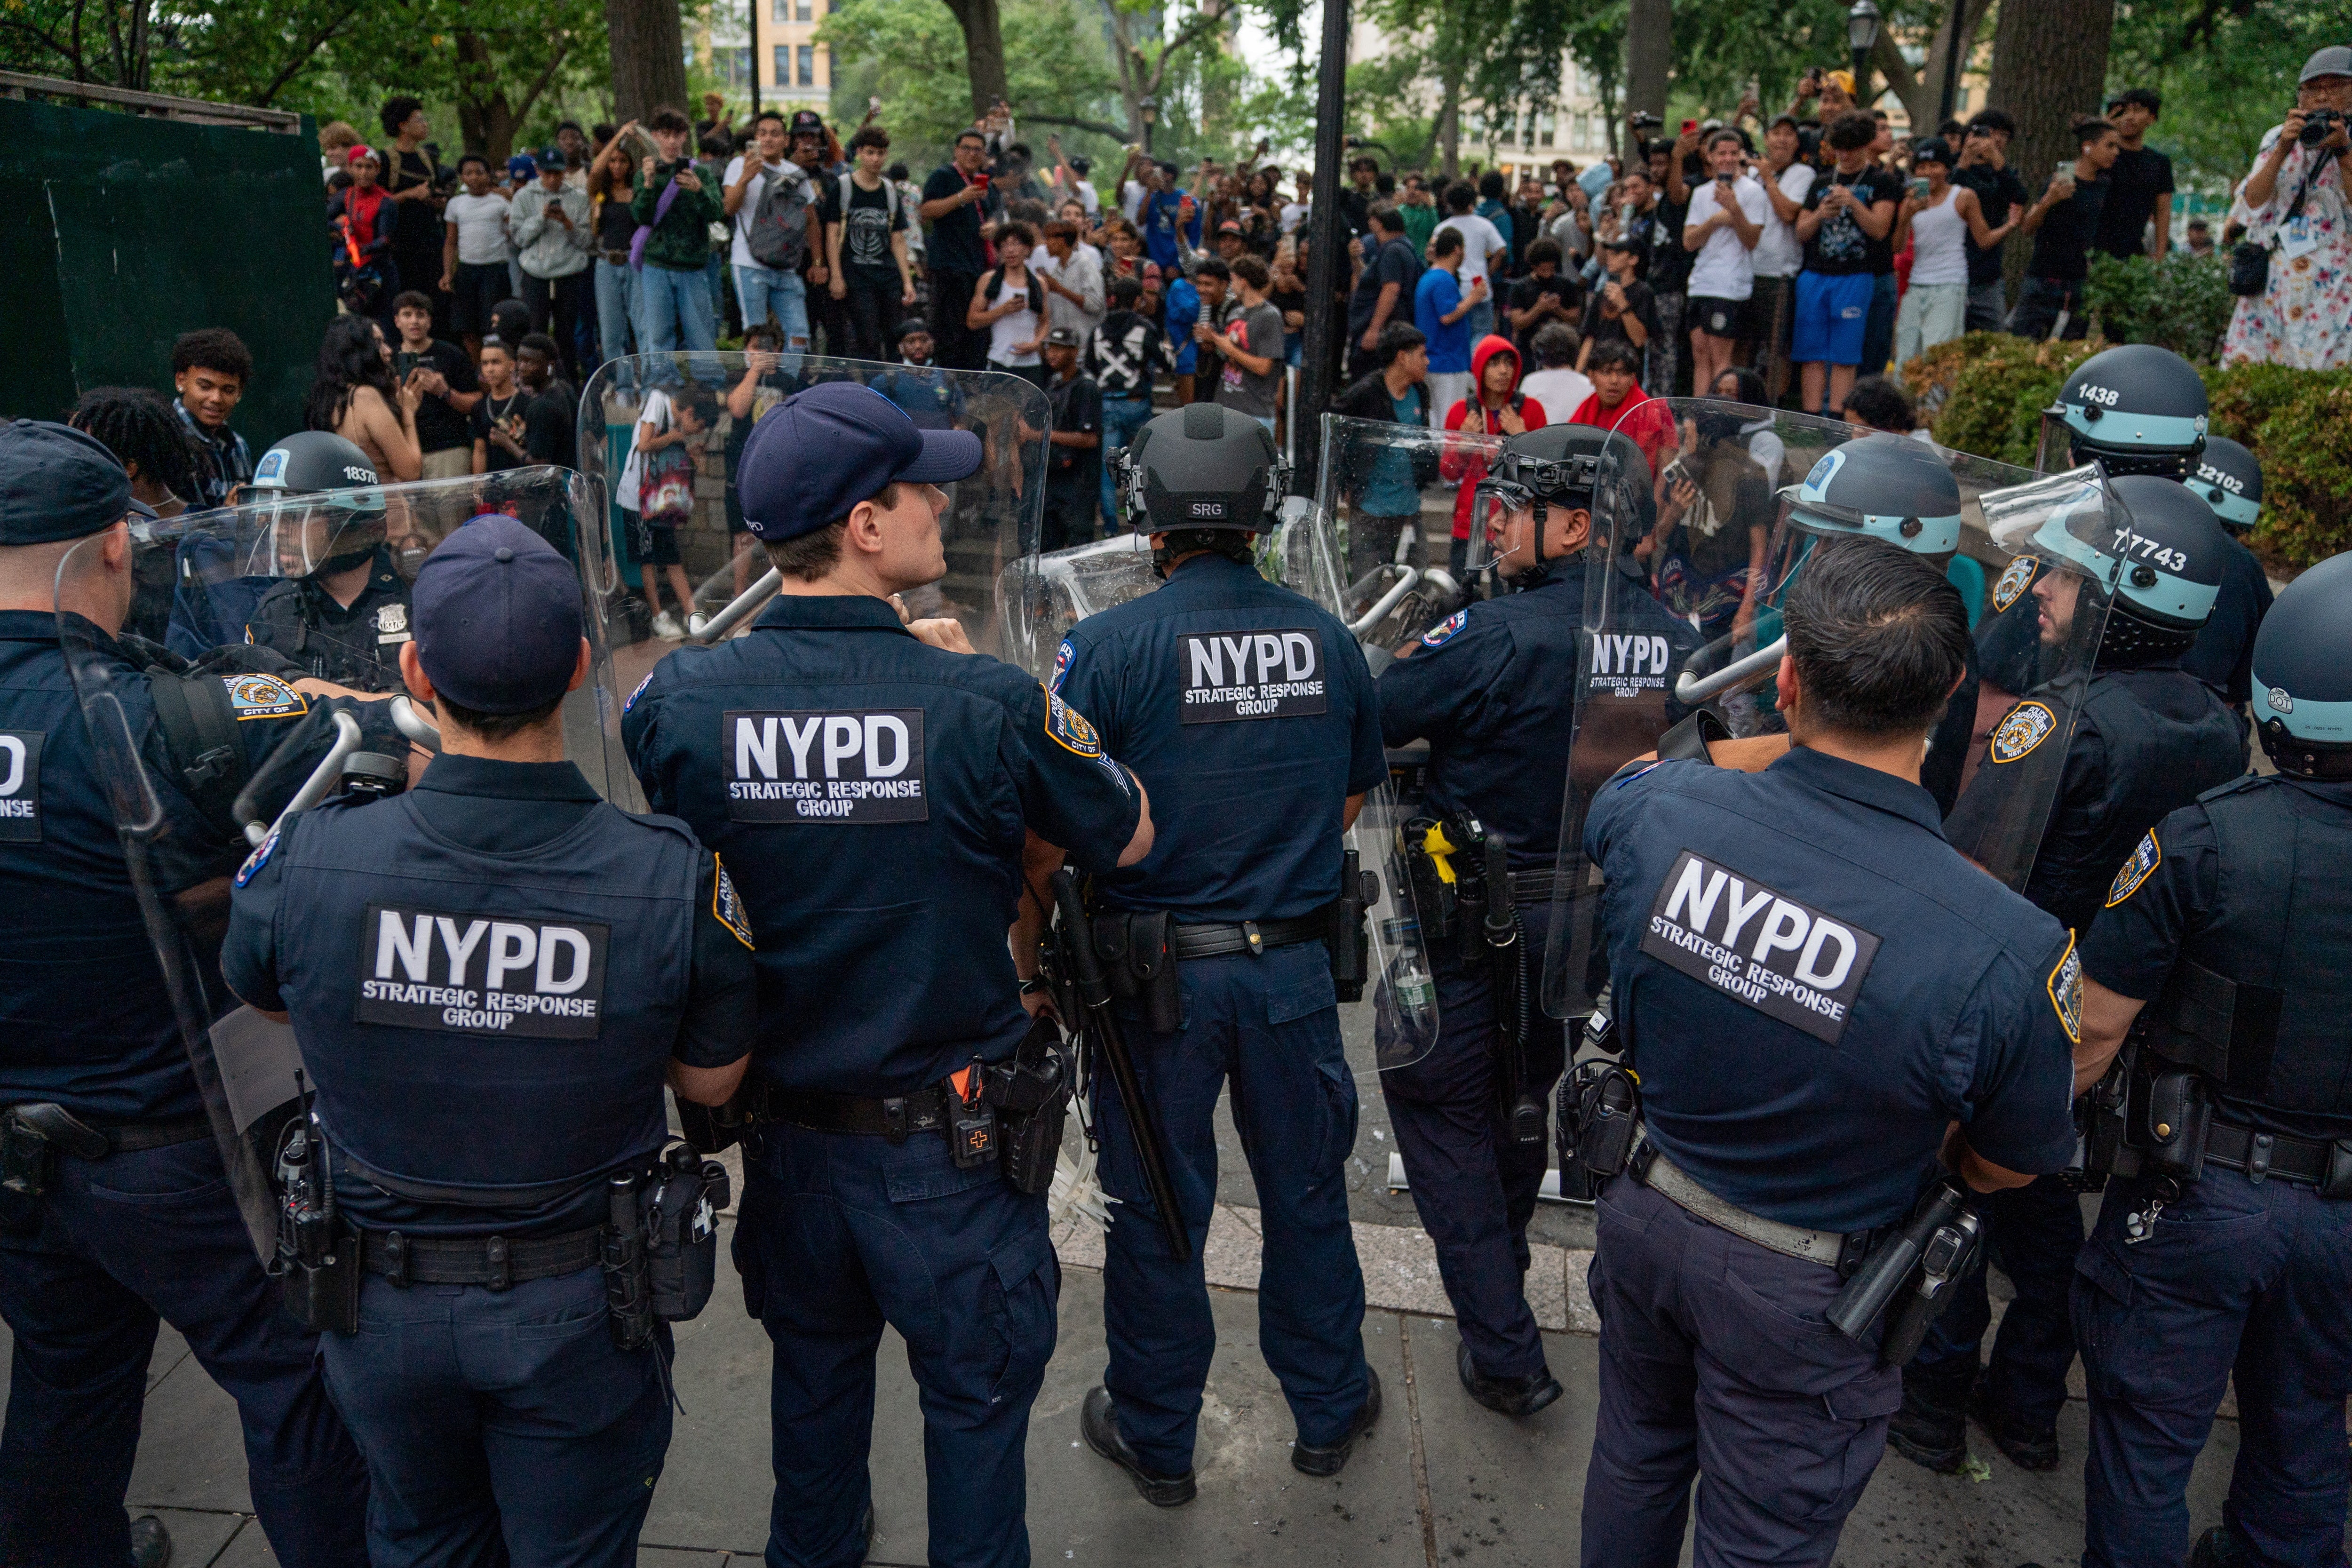 NYPD officers turned out in force